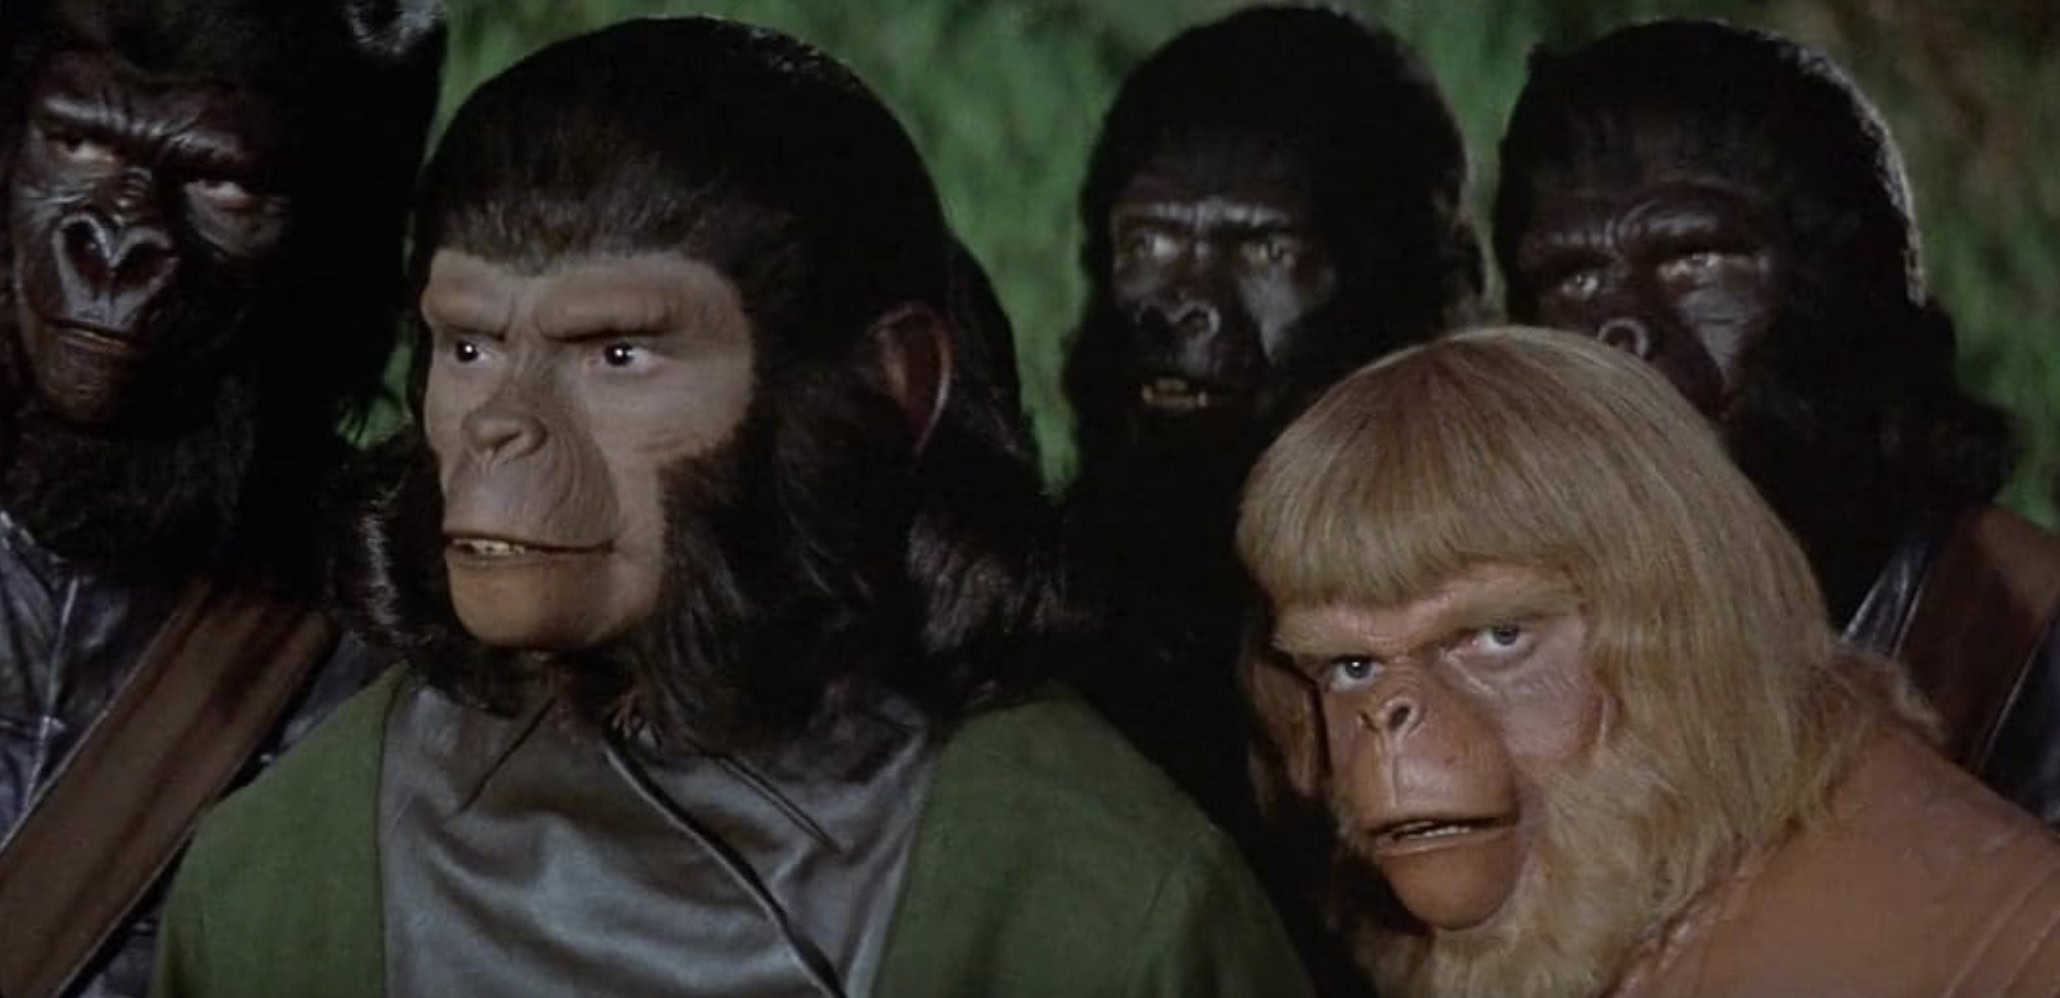 Apes in uniform stand together in this image from APJAC Productions.